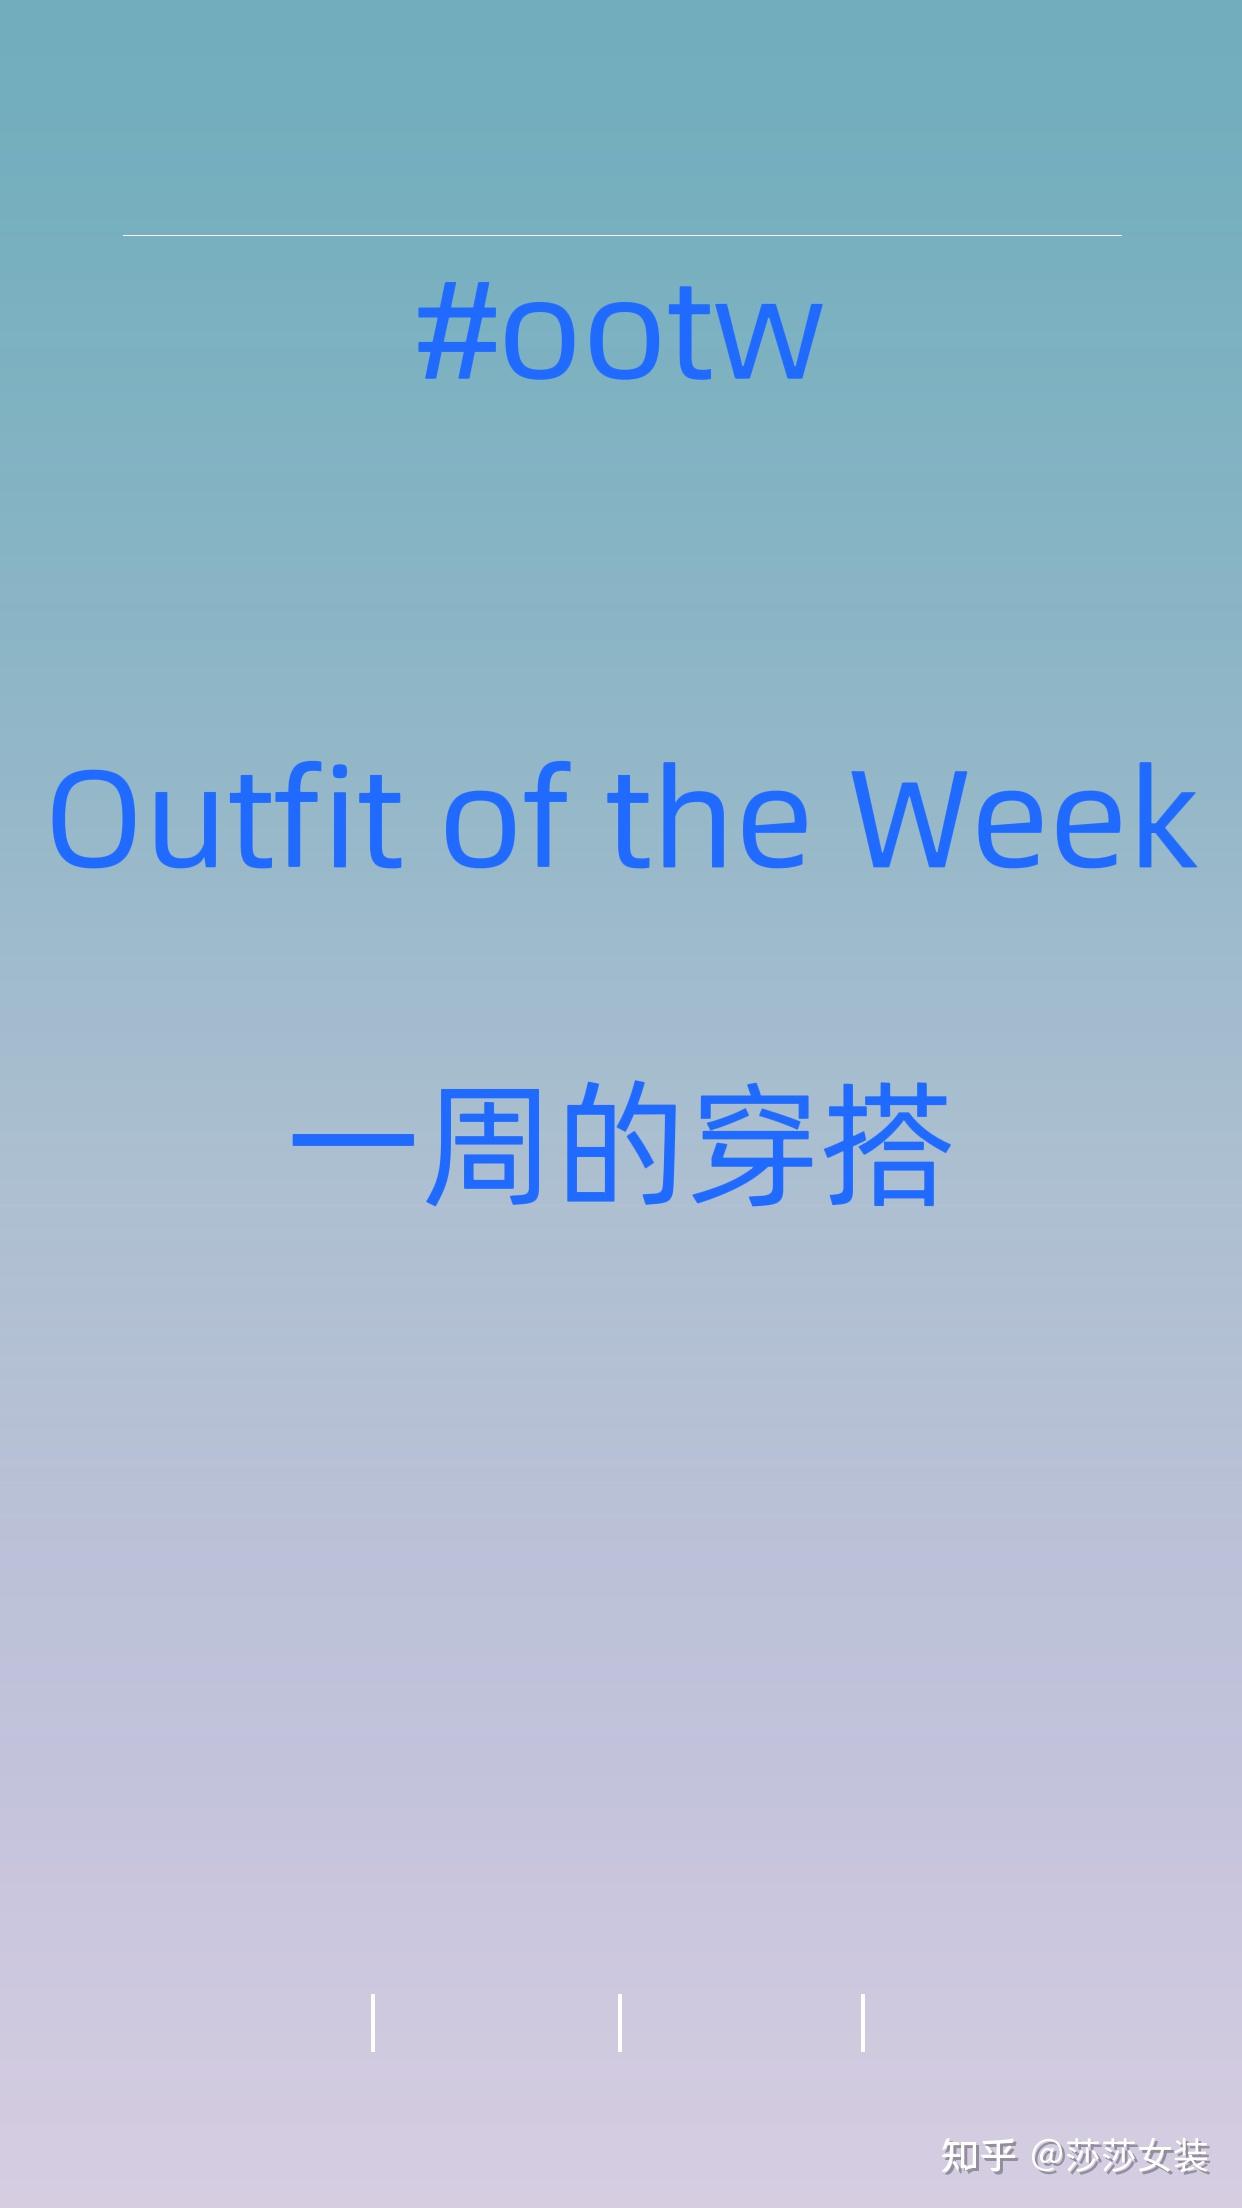 outfit of the day什么意思（外贸人学英语）-百运网